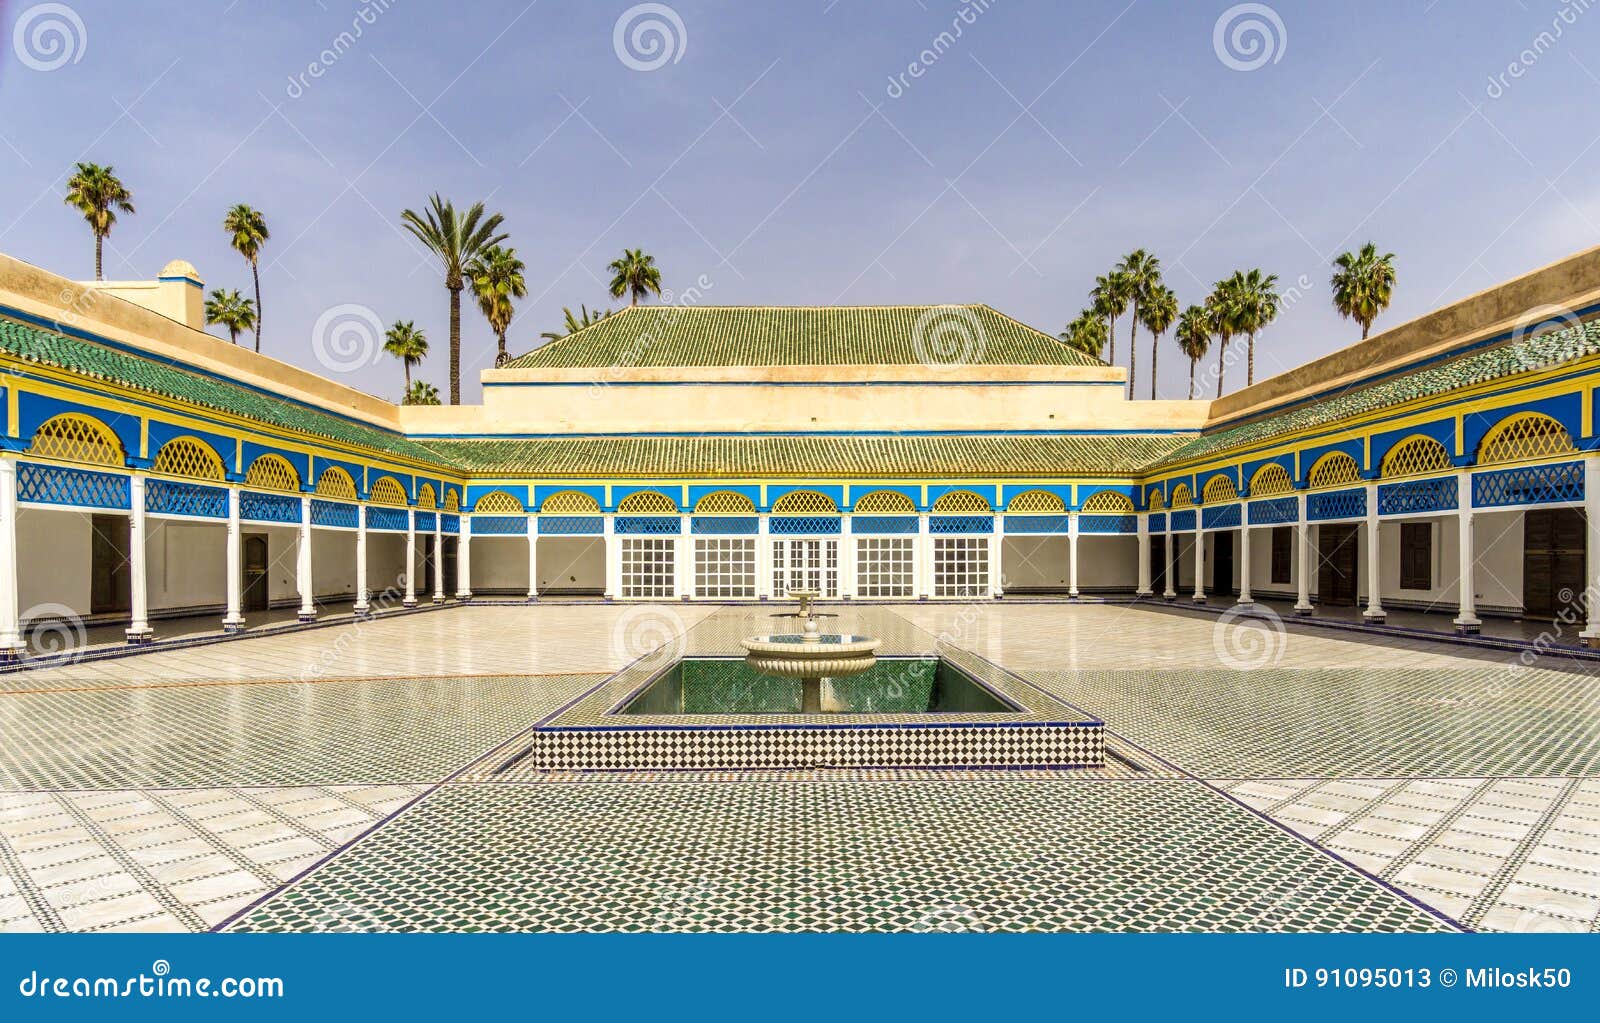 courtyard of the bahia palace in marrakesh - morocco